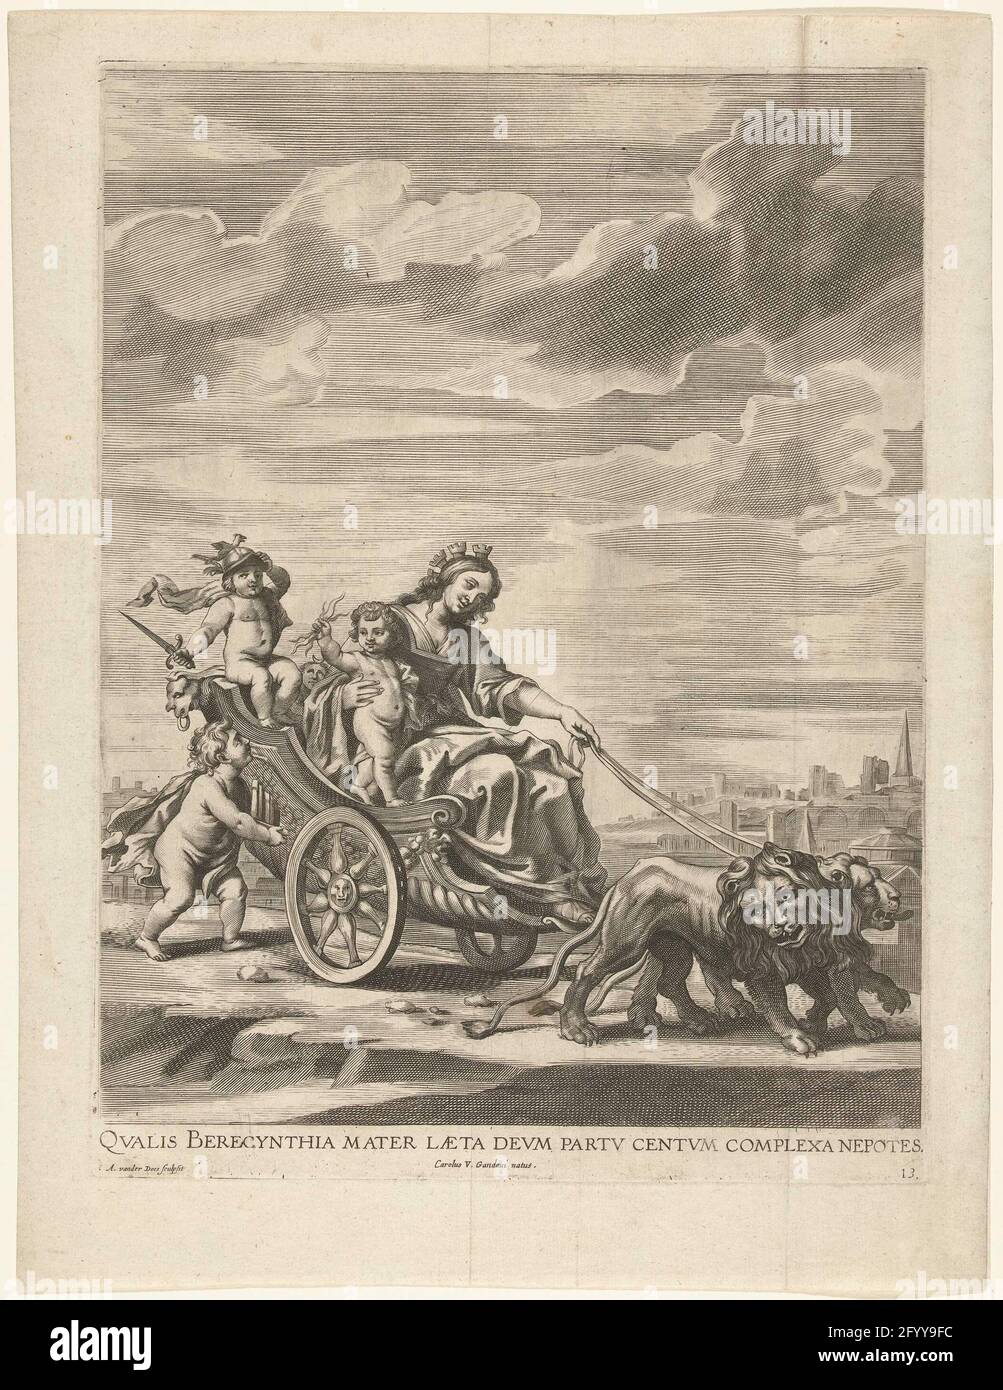 Allegory with the city mawn from Ghent in her chariot; entry from Ferdinand in Ghent in 1635 (no. 13); Qualis Berecynthia Mater Laeta Deum Partu Centum Complexa Nepotes / Carolus V. Gandavi Natus; Tabula I. Adversae Partis. Cybele Ganda Opposita. Allegory with the city mawn from Ghent in her chariot drawn by lions. Allegory with Cybele such as Ghent as the birthplace of Emperor Charles V. Performance at the top of the rear of the triumph port Arcus Fernandi on the Friday market. Leaf No. 13 in a set of 42 plates that illustrate the publication of the description of the arrival of the Cardinal Stock Photo